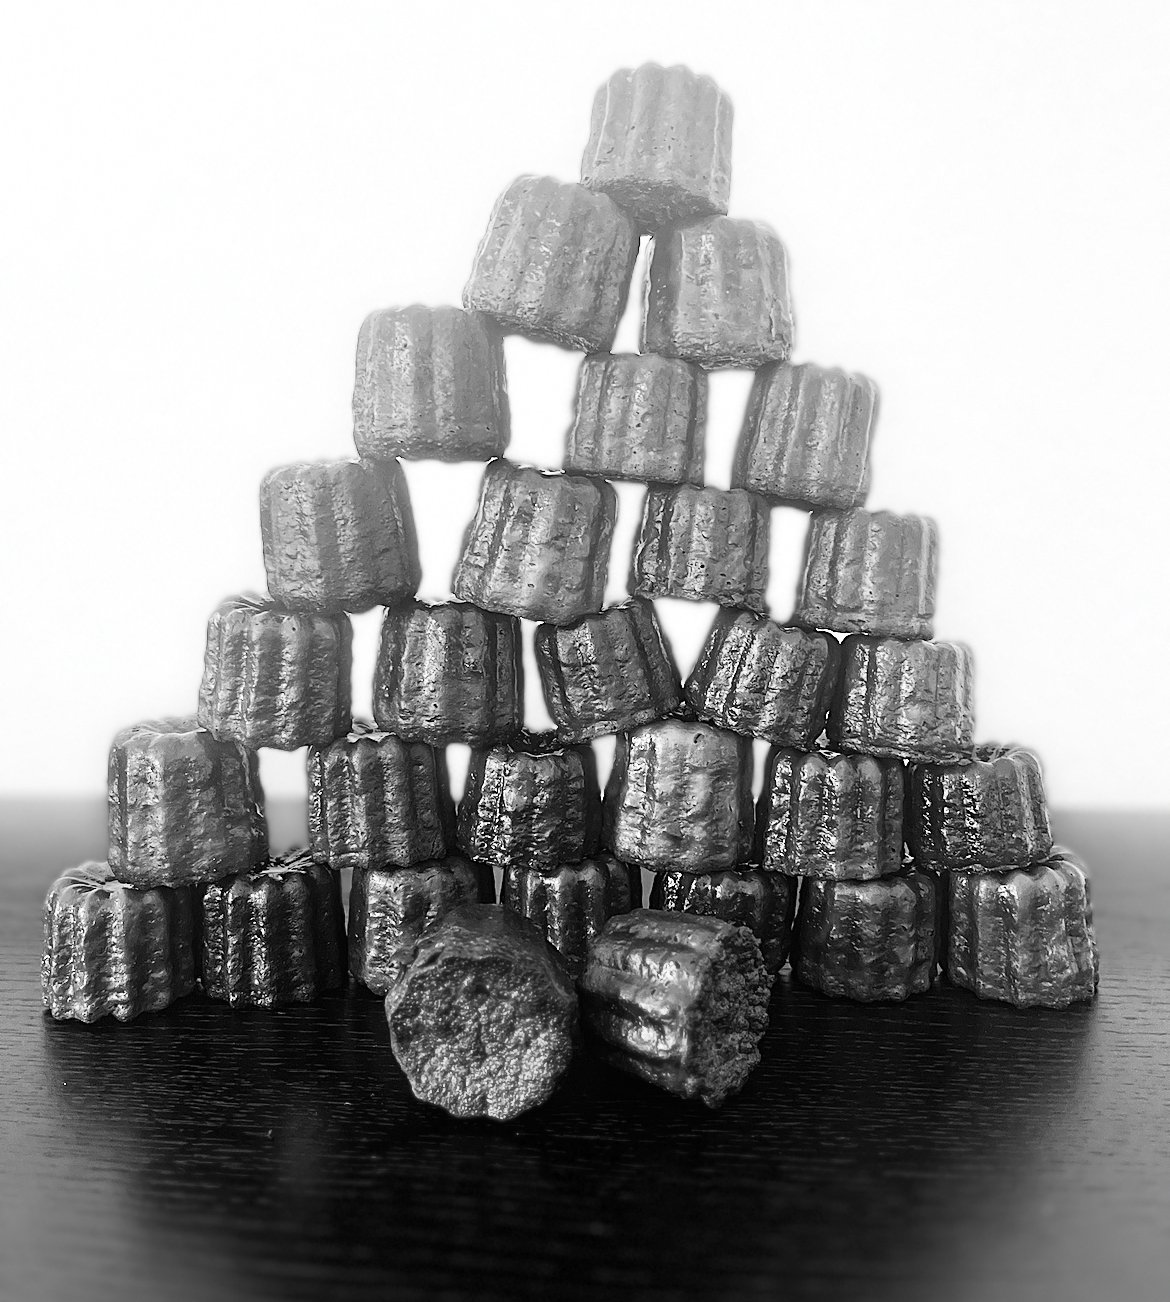 The tower of caneles